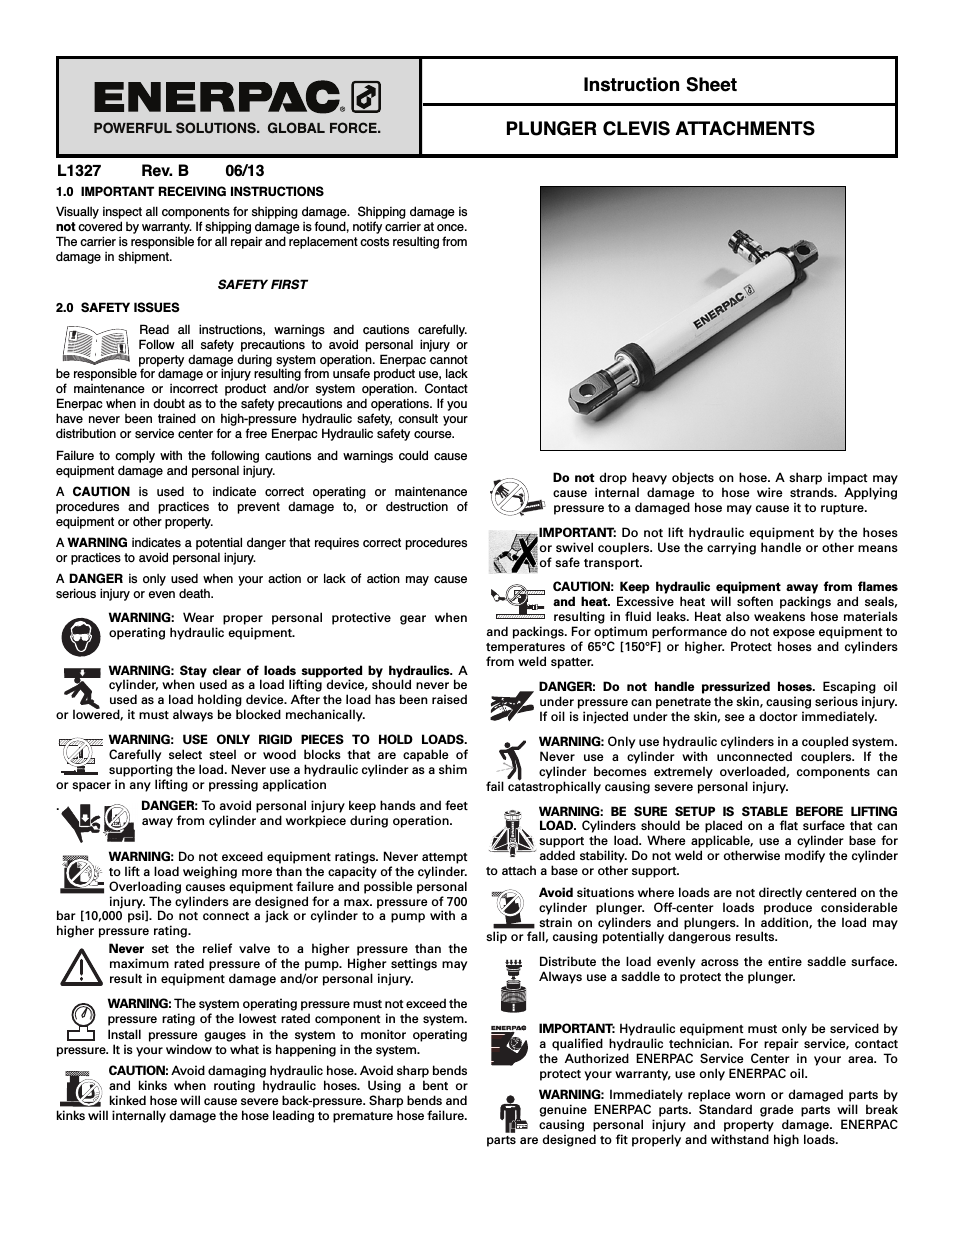 RC-Series Plunger clevis attachments